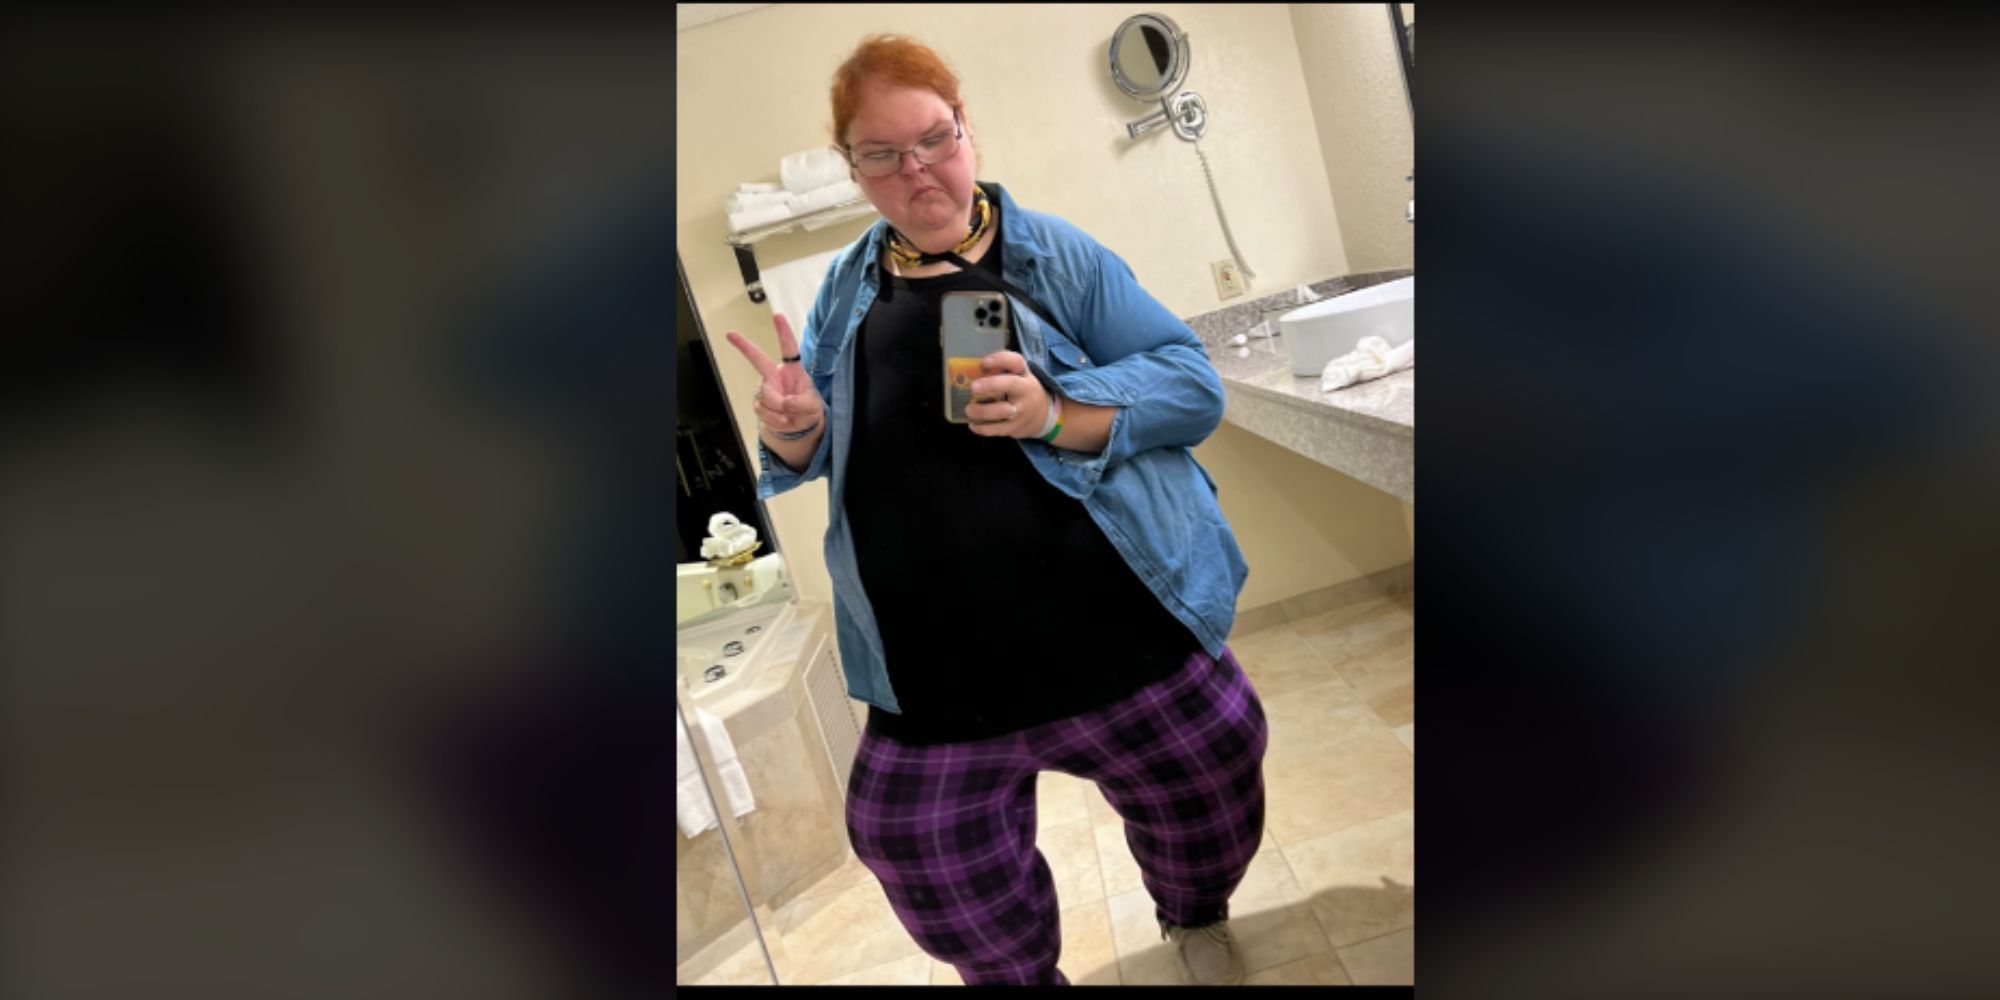 1000-lb sisters tammy slaton OOTD mirror selfie, she's making a peace sign in the mirror, purple plaid pants